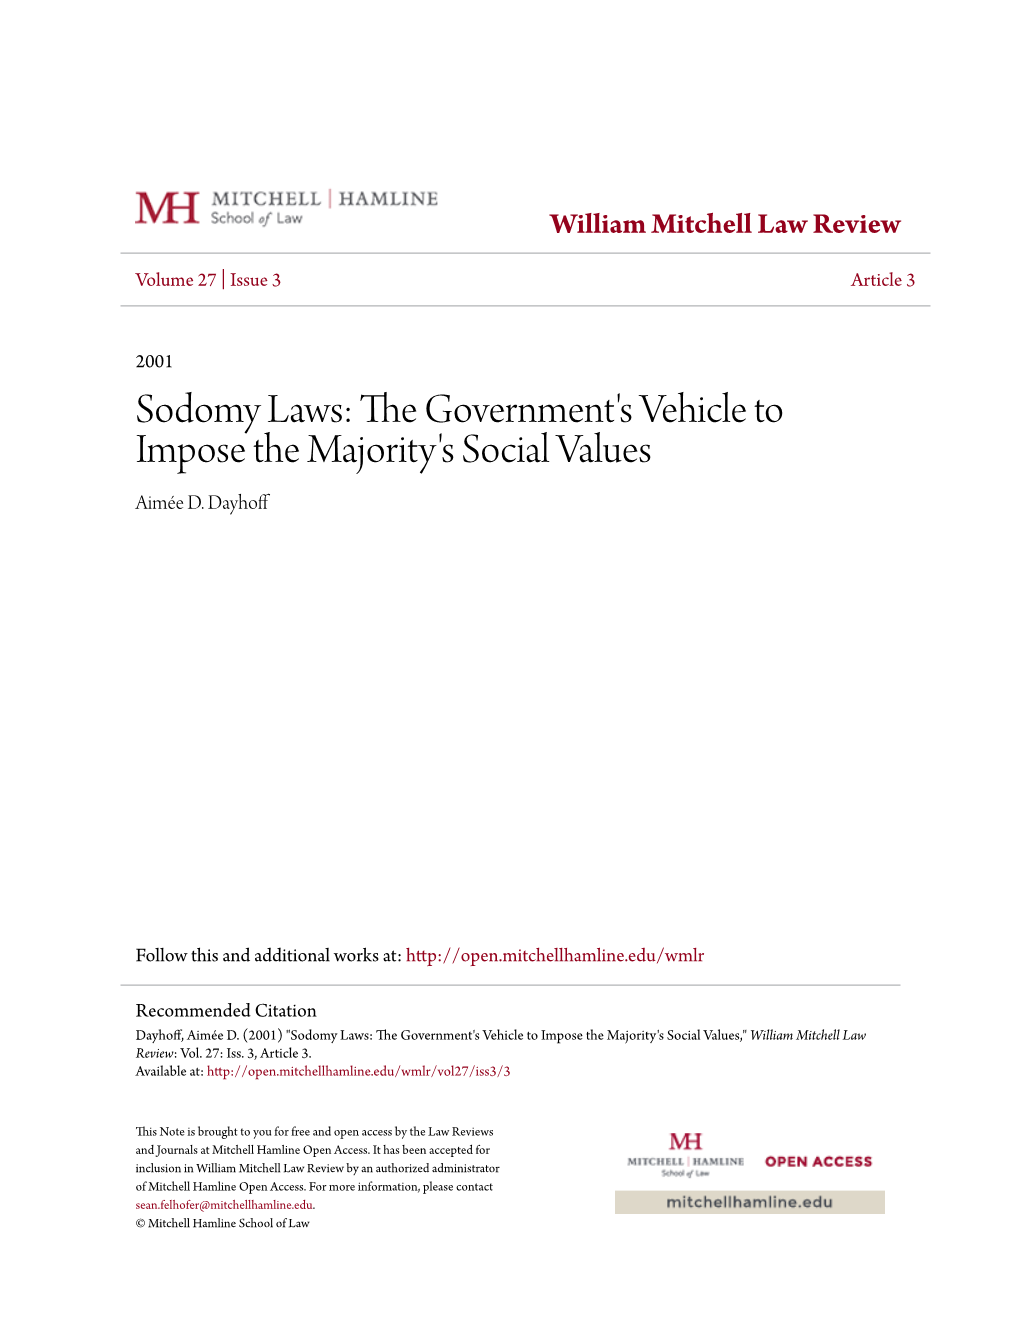 Sodomy Laws: the Government's Vehicle to Impose the Majority's Social Values Aimée D